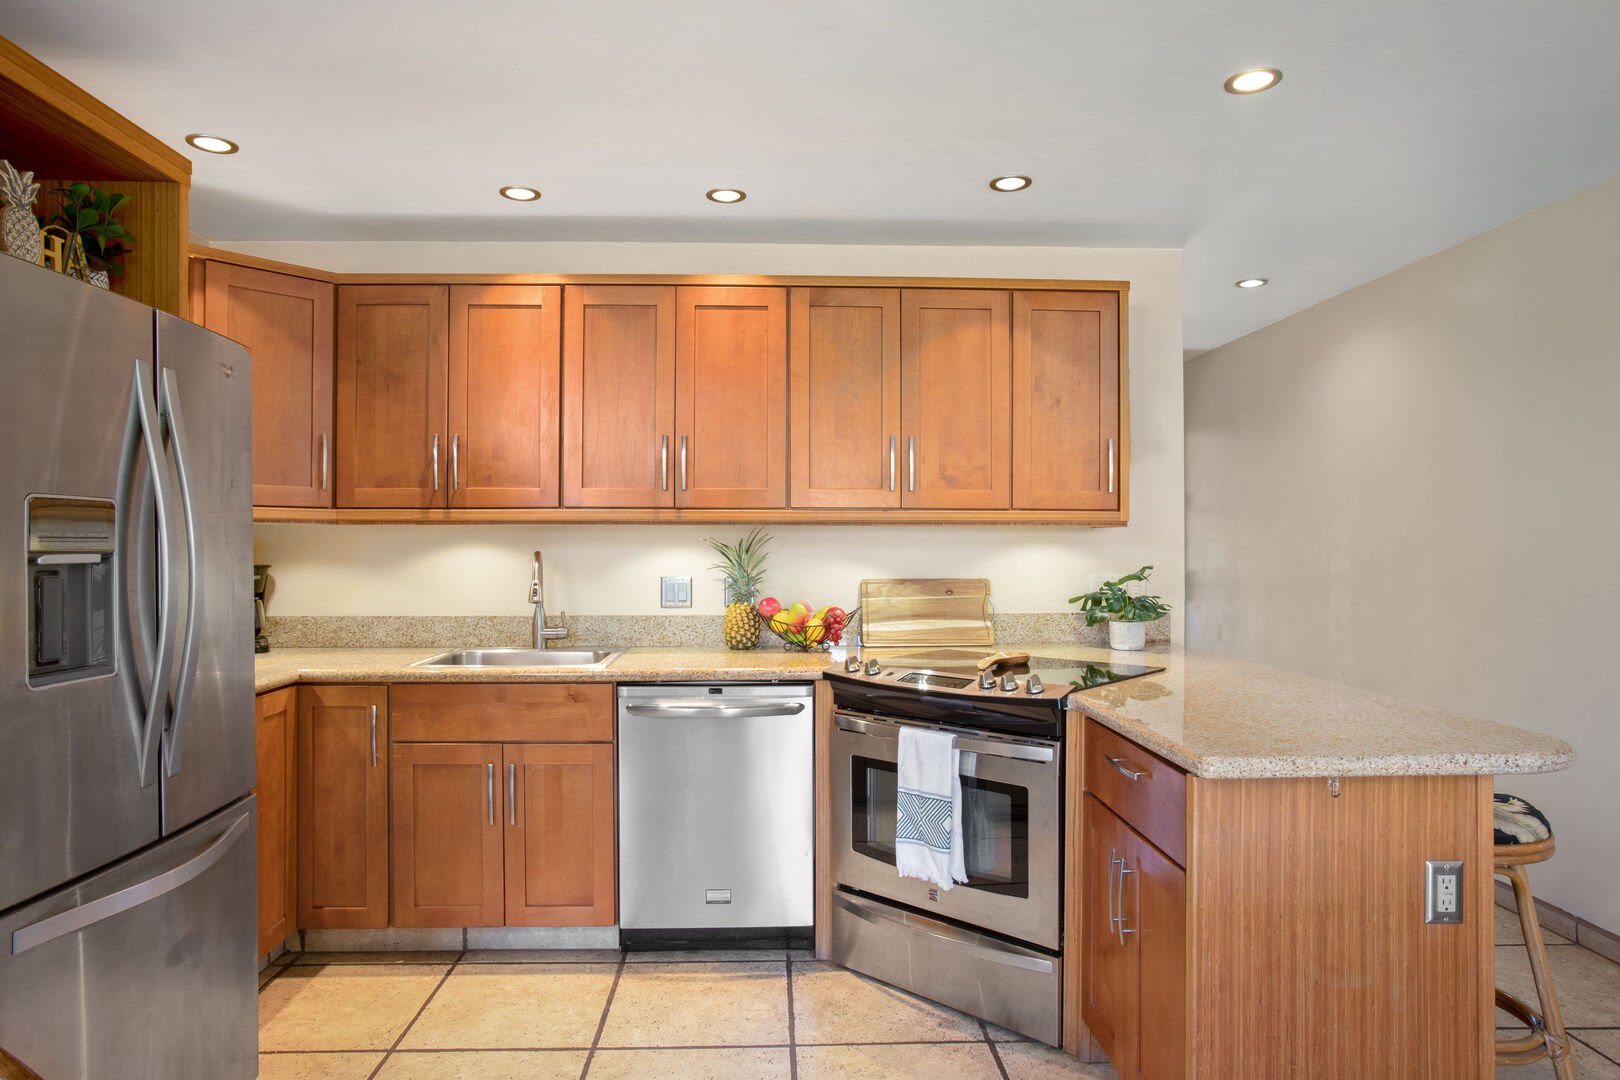 Fully-equipped kitchen with refrigerator, dishwasher, stove, oven, and microwave